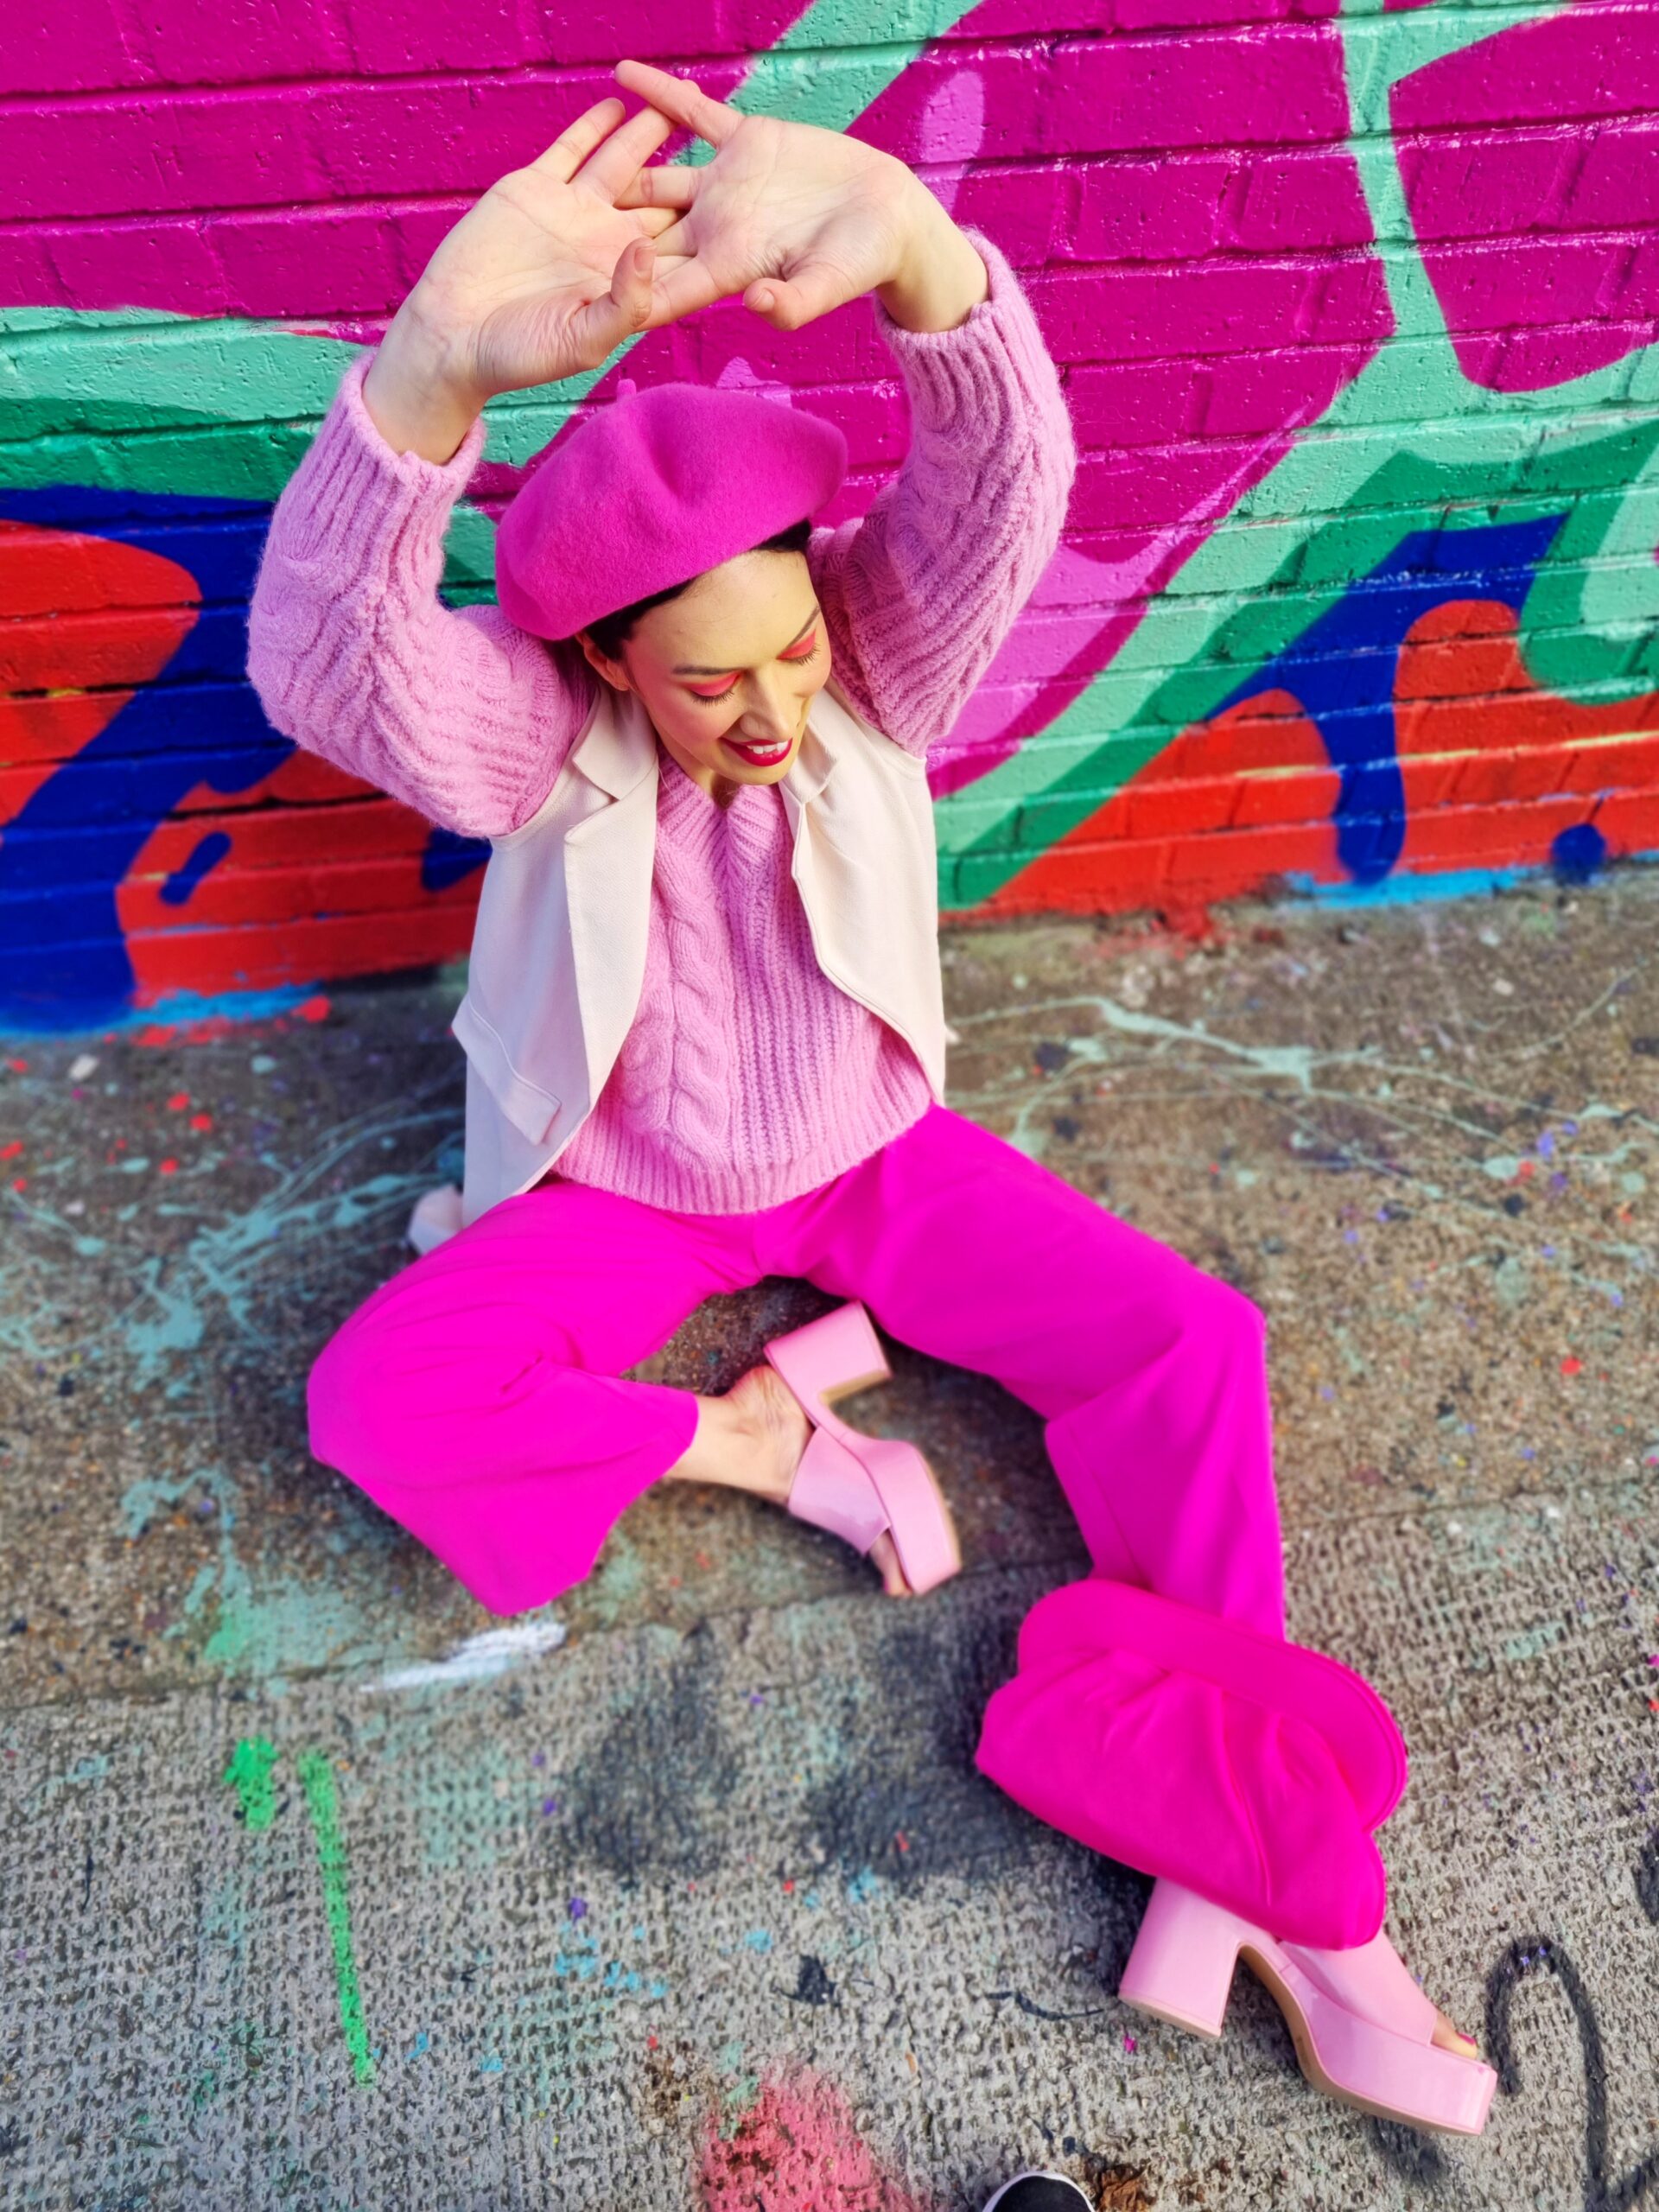 <img src="ana.jpg" alt="ana in pink suit trousers and mules"/>